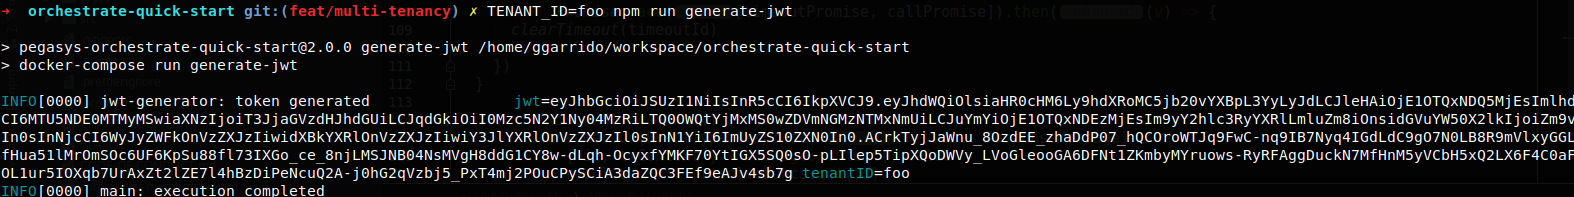 Output of the generate-jwt command